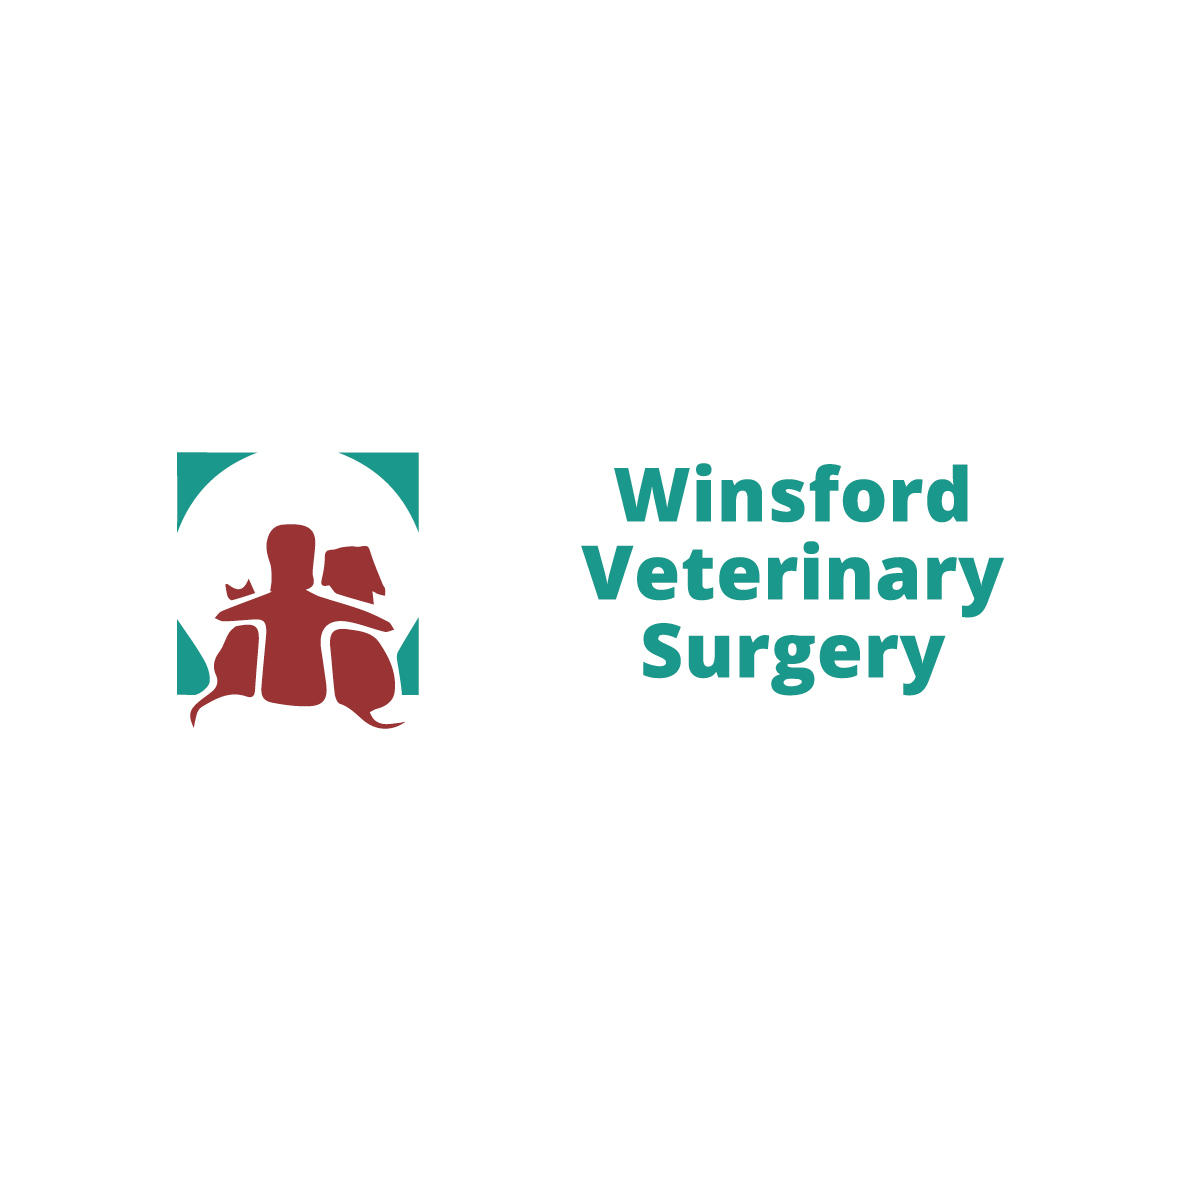 Willows Veterinary Group - Winsford Veterinary Surgery - Winsford, Cheshire CW7 2AP - 01606 592714 | ShowMeLocal.com